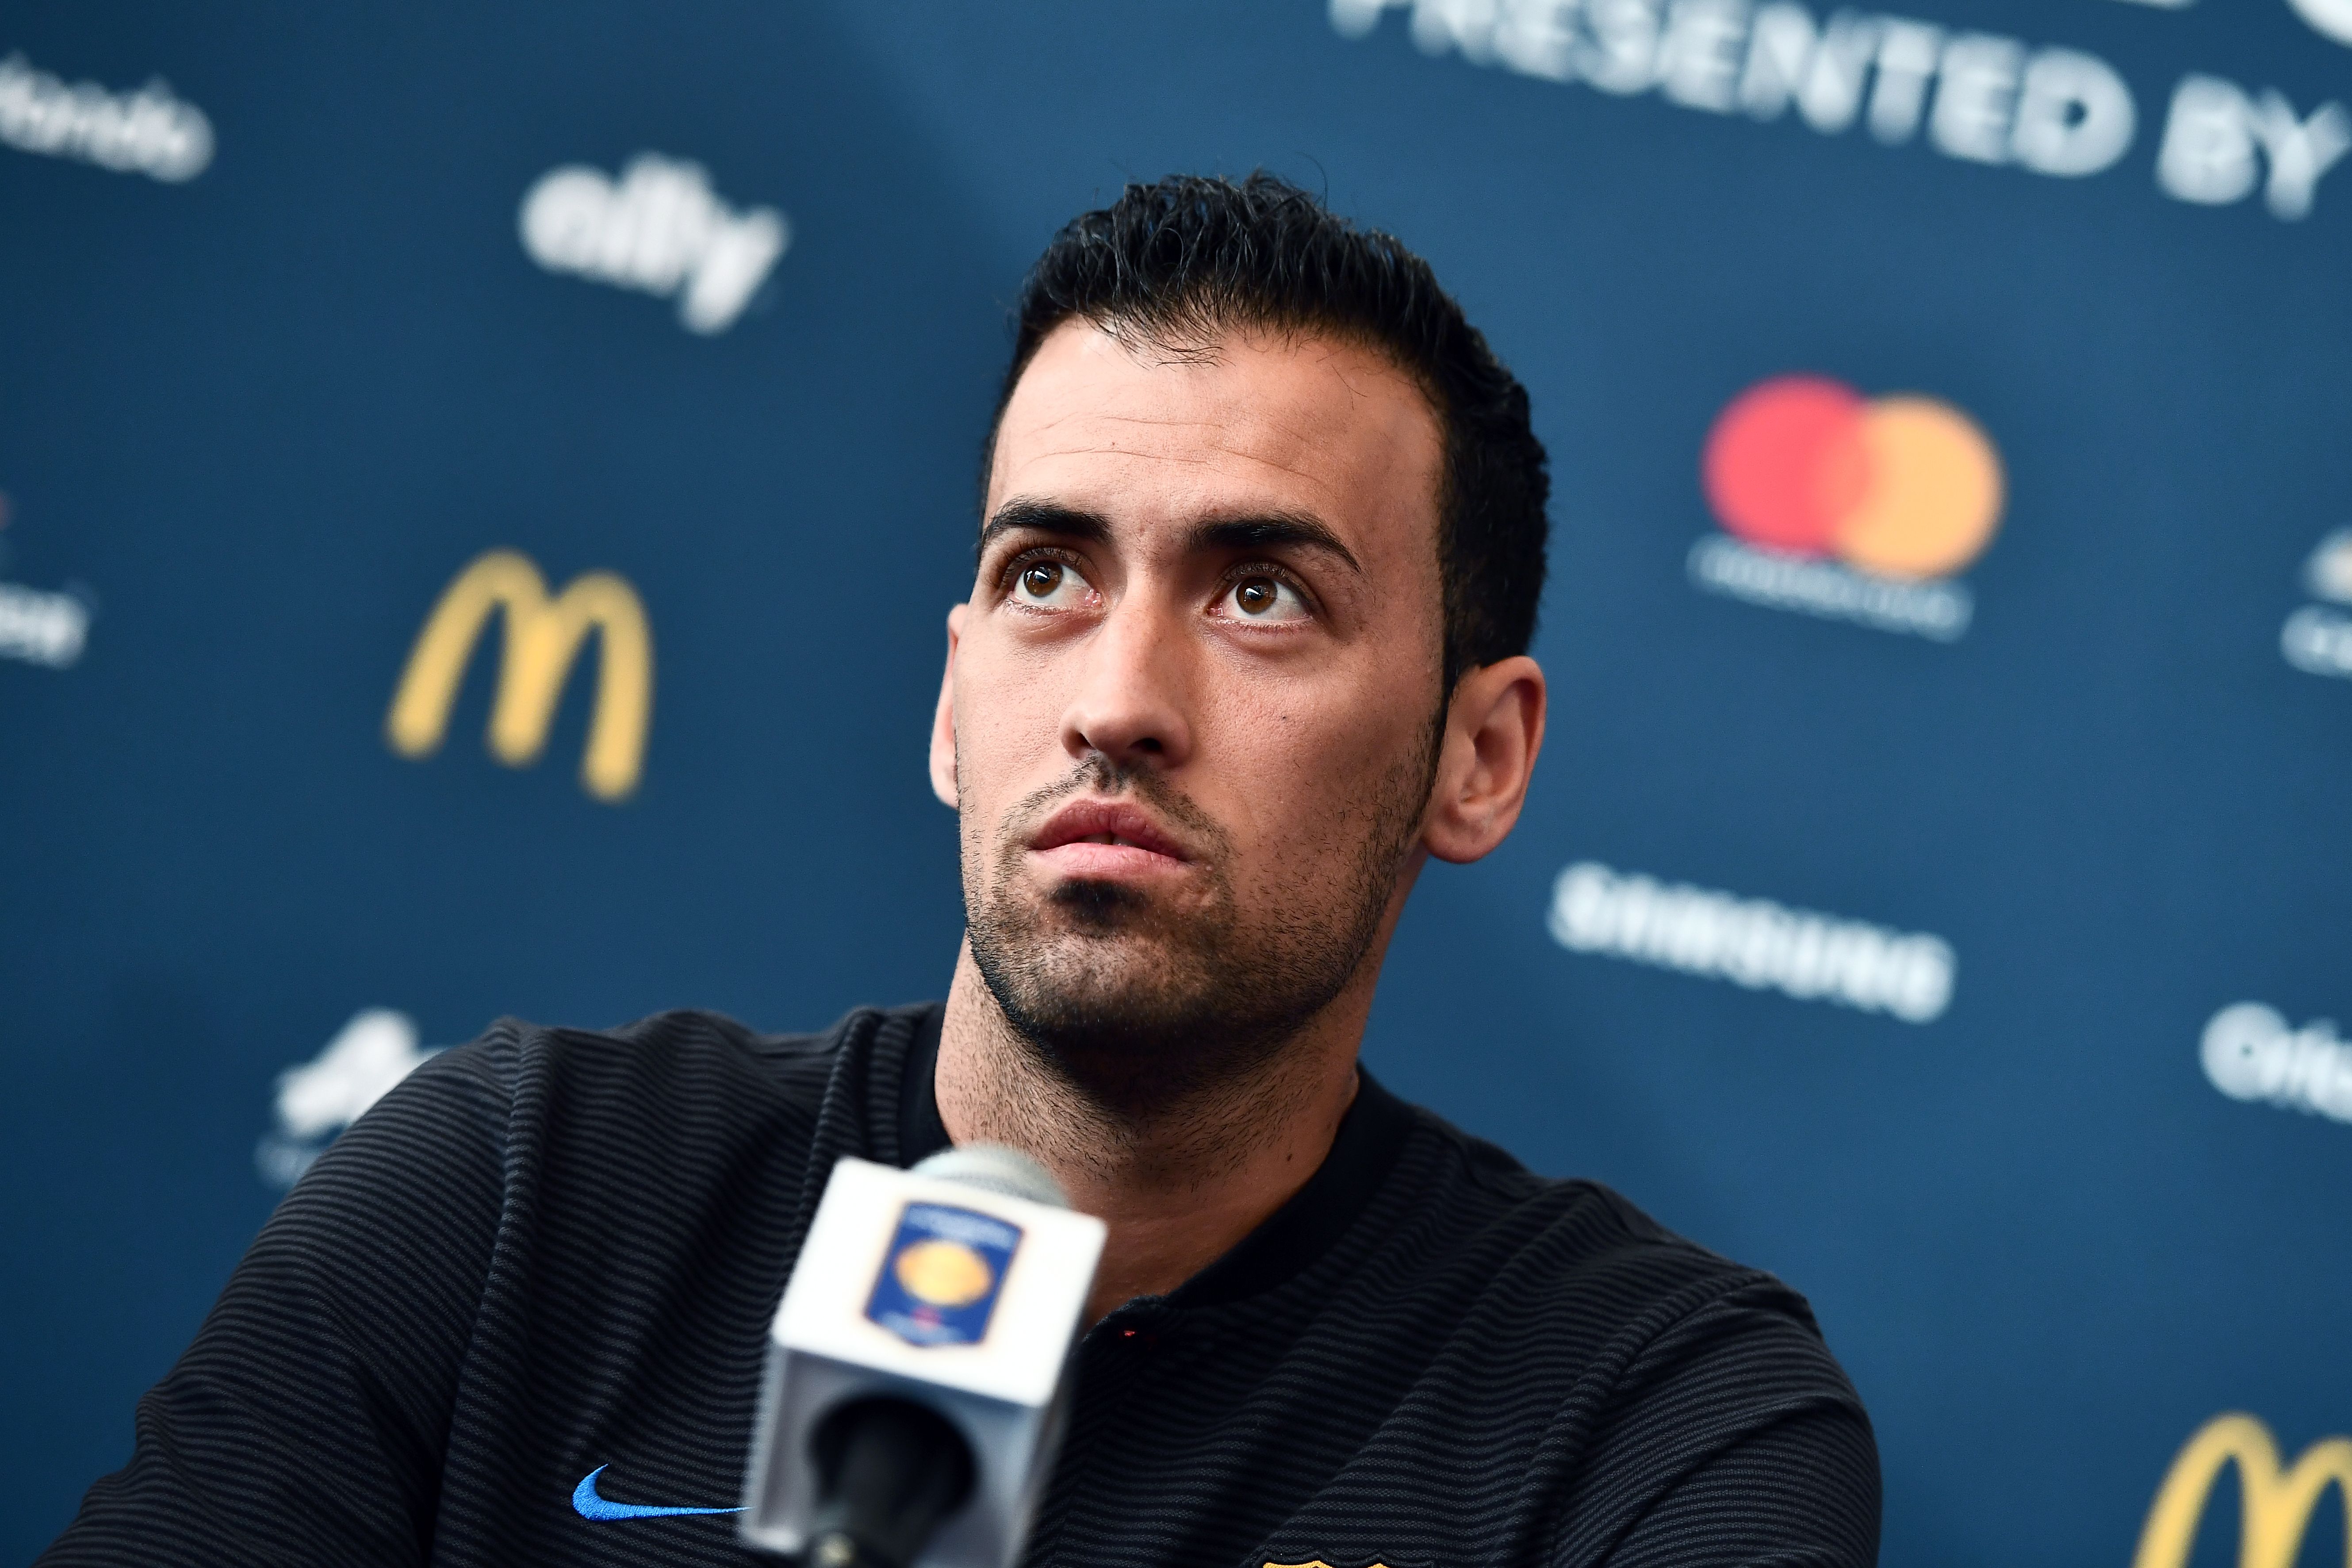 Sergio Busquets will need to lead from the front. (Photo by Jewel Samad/AFP/Getty Images)